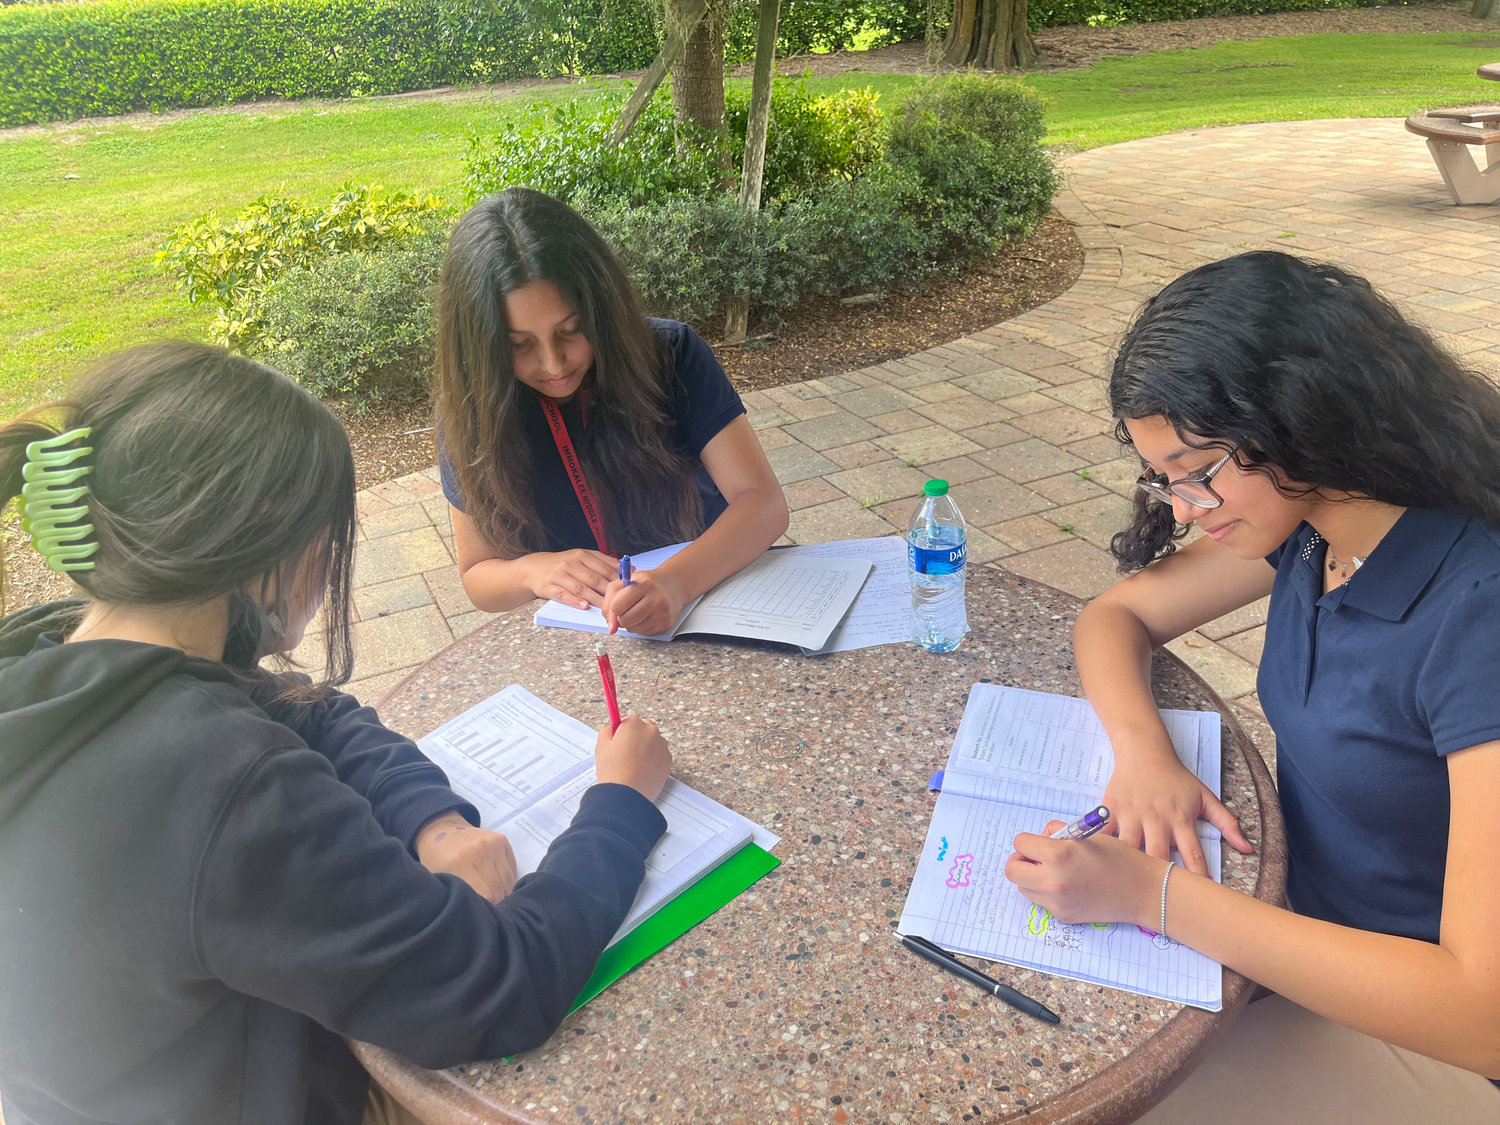 Immokalee Foundation middle school students Carol, Marcella and Angela learn to support each other on their educational journeys.